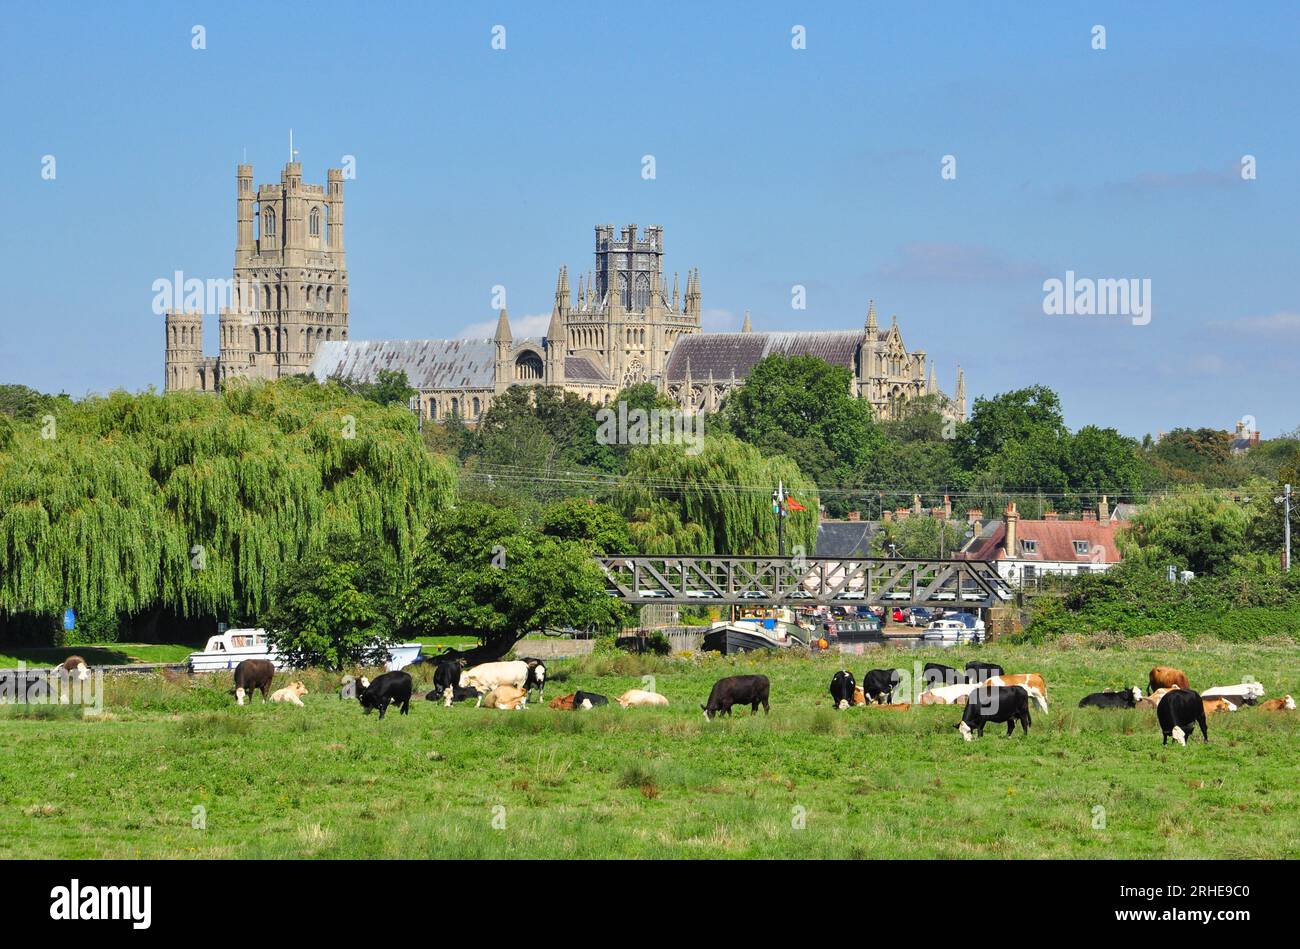 Cows grazing in a meadow, railway girder bridge and cathedral at Ely, Cambridgeshire, England, UK Stock Photo